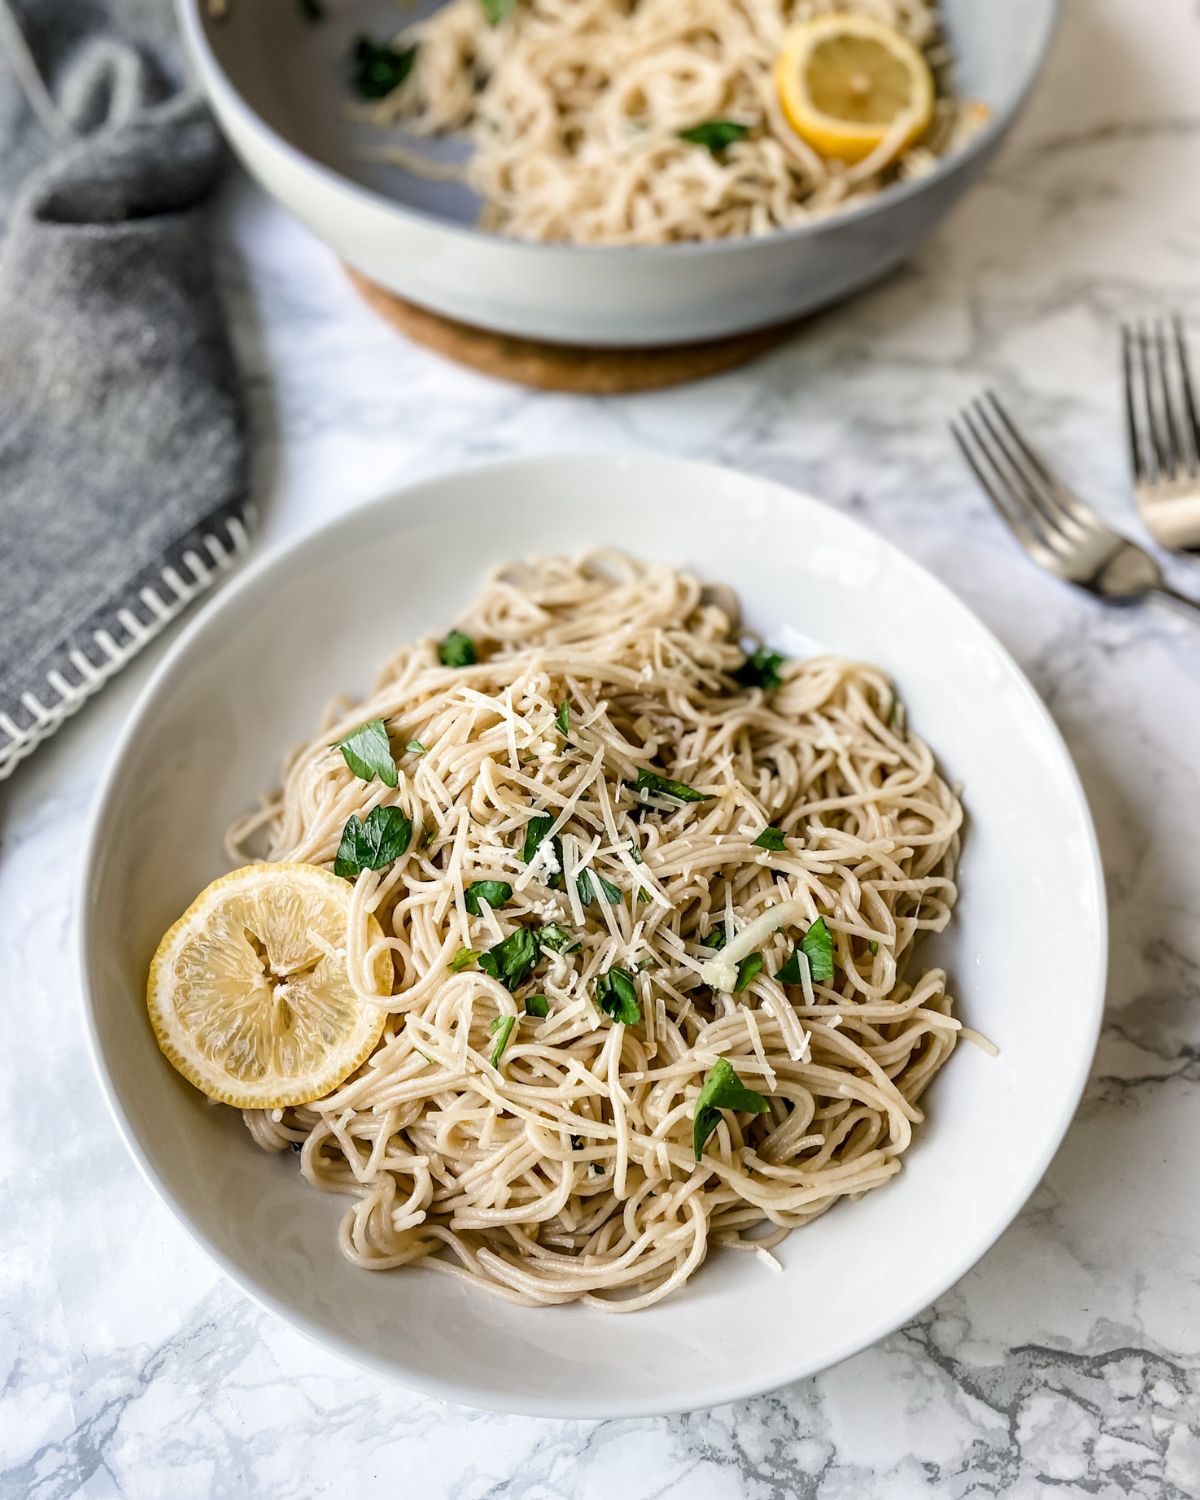 lemon garlic pasta on a plate with a pan of pasta in the background.